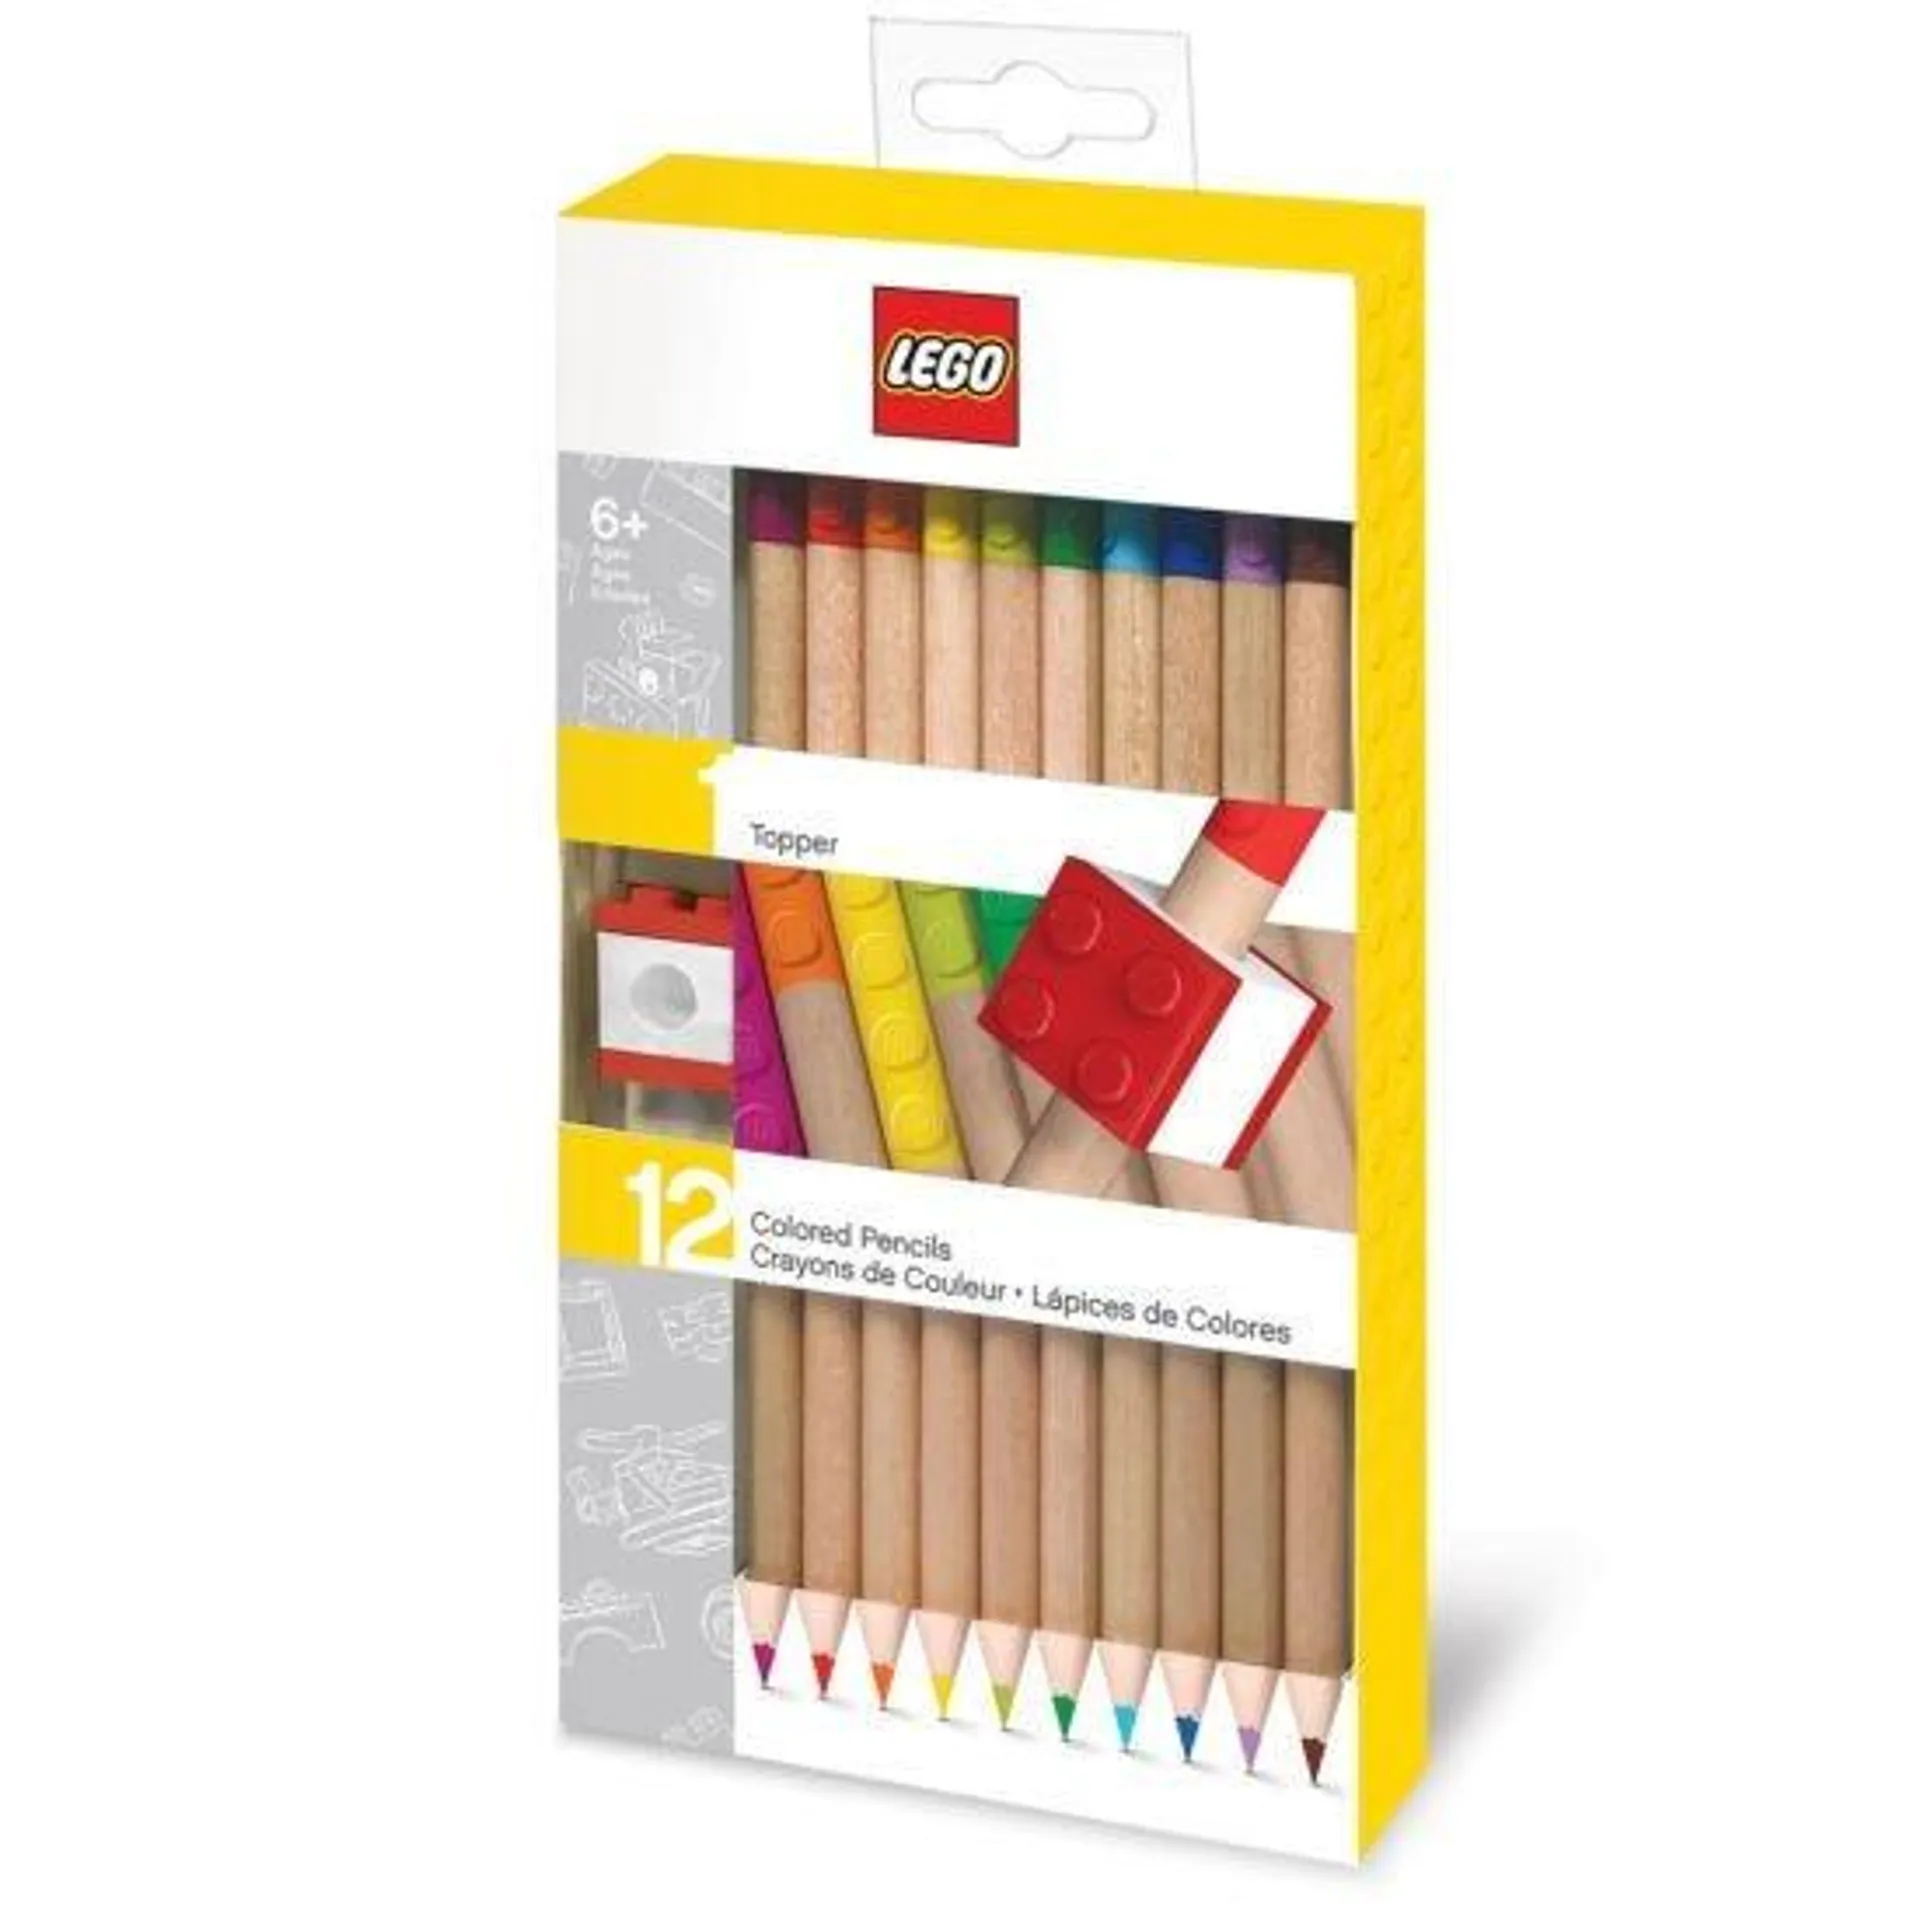 LEGO Iconic Writing Instrument - Pack of 12 Coloured Pencils with Topper